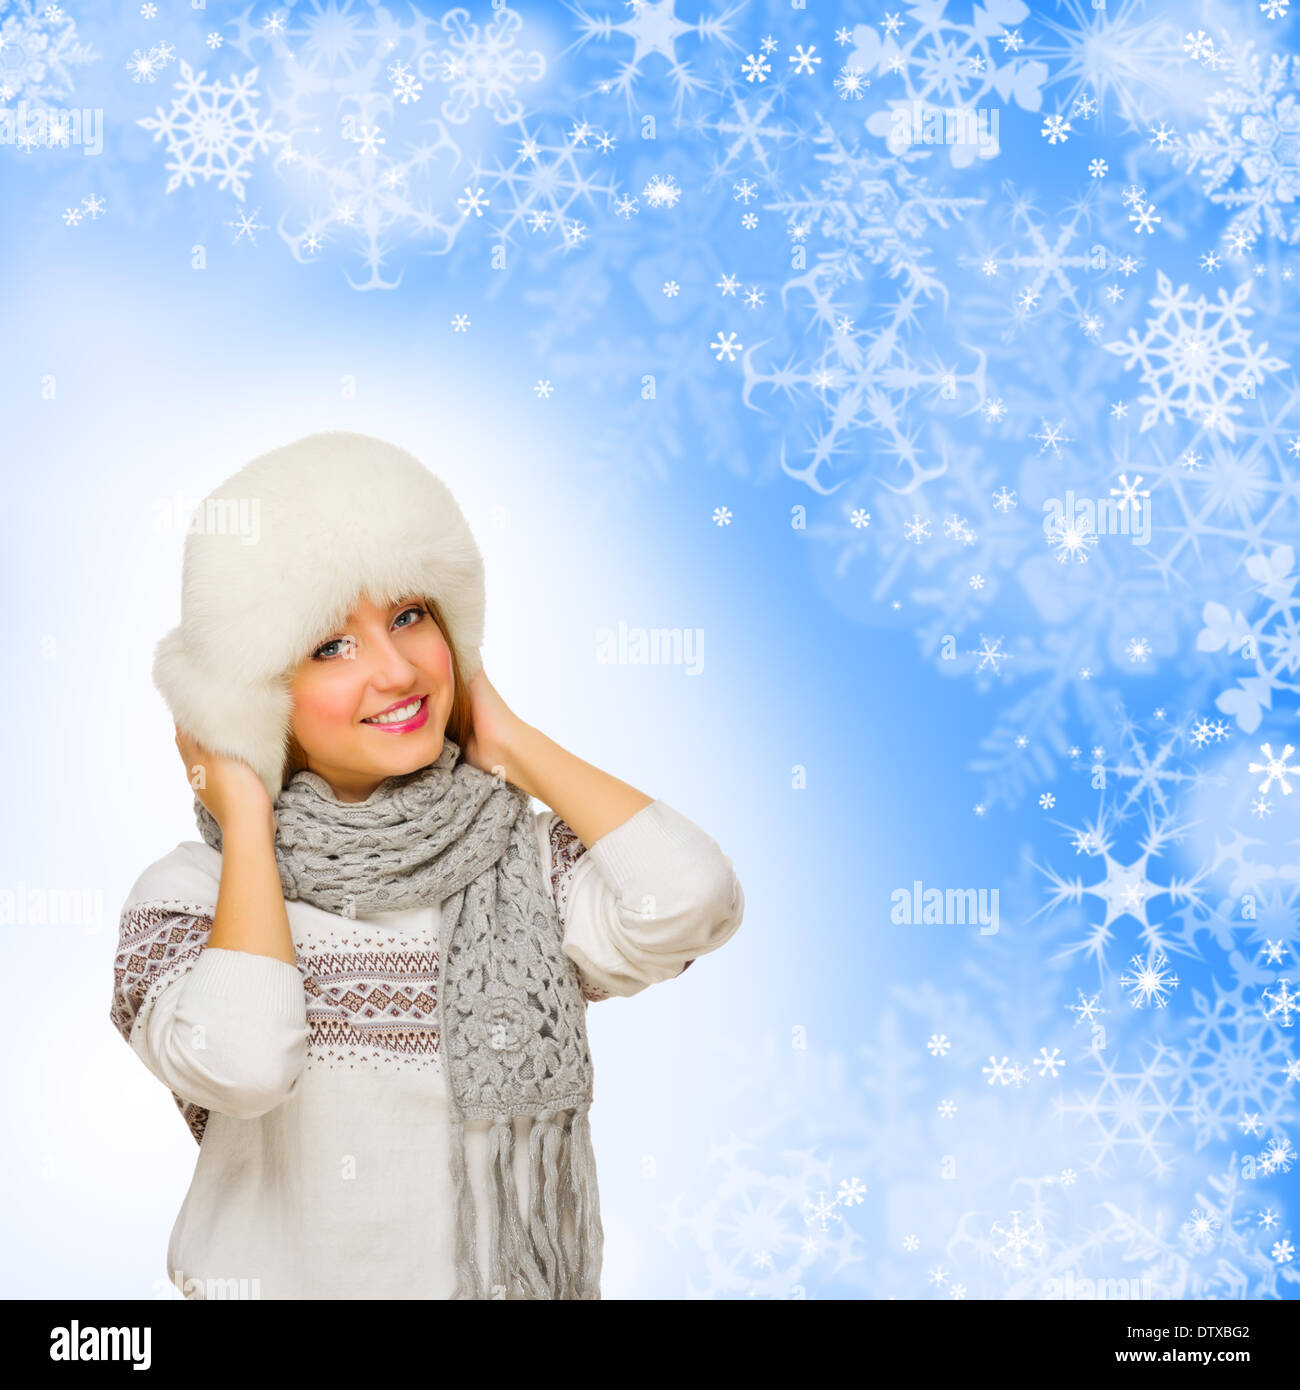 Young girl in fur hat on winter background Stock Photo